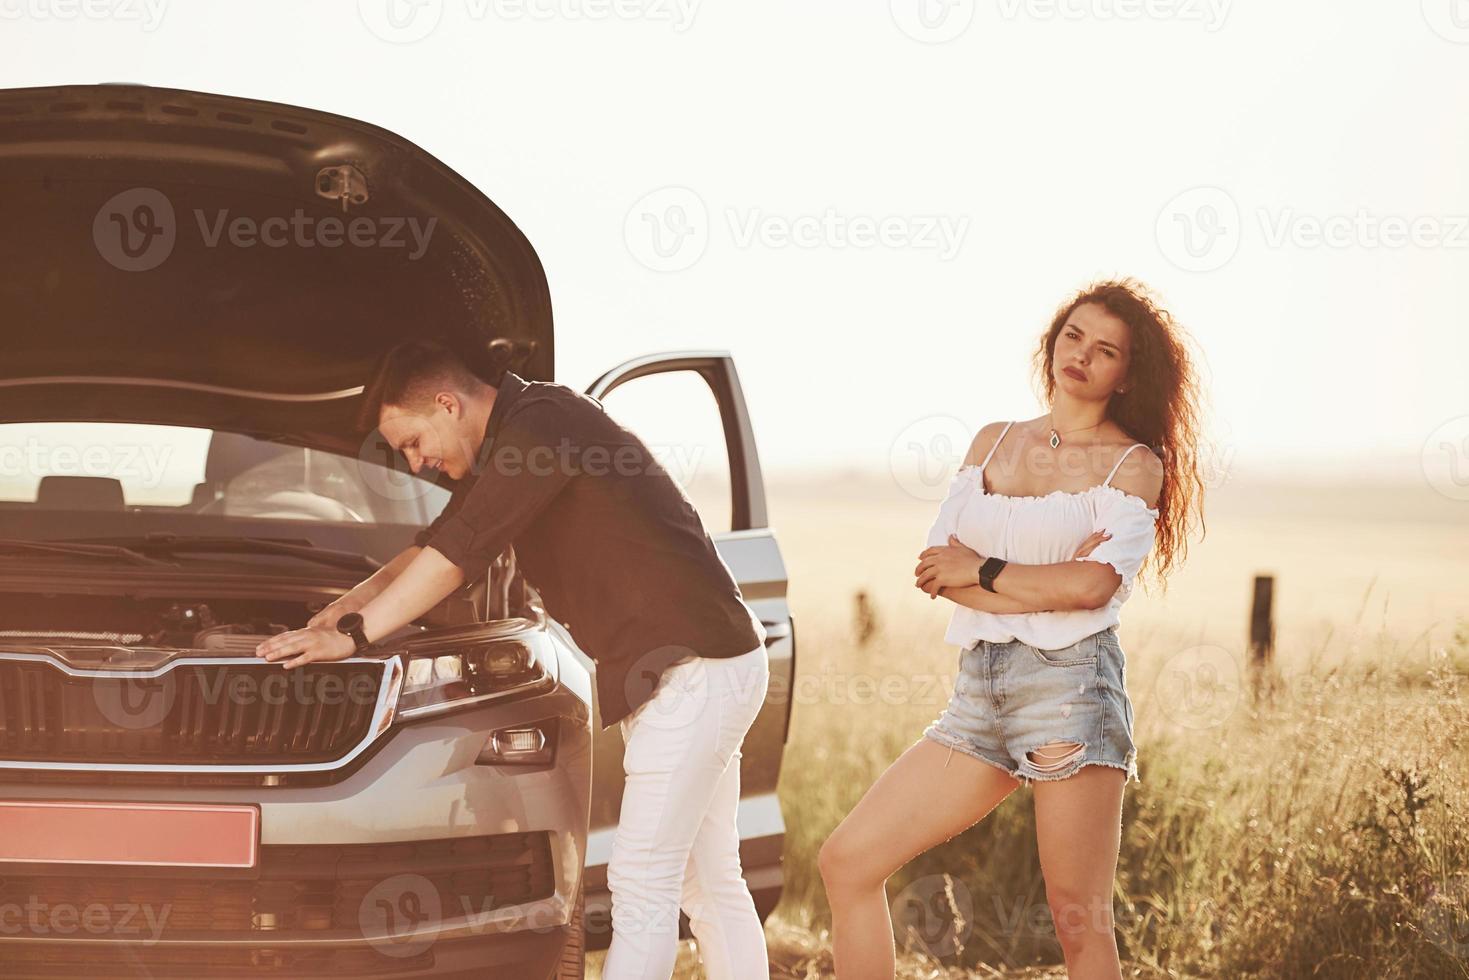 Man repairs car of girl with curly hair. Mechanical assistance photo